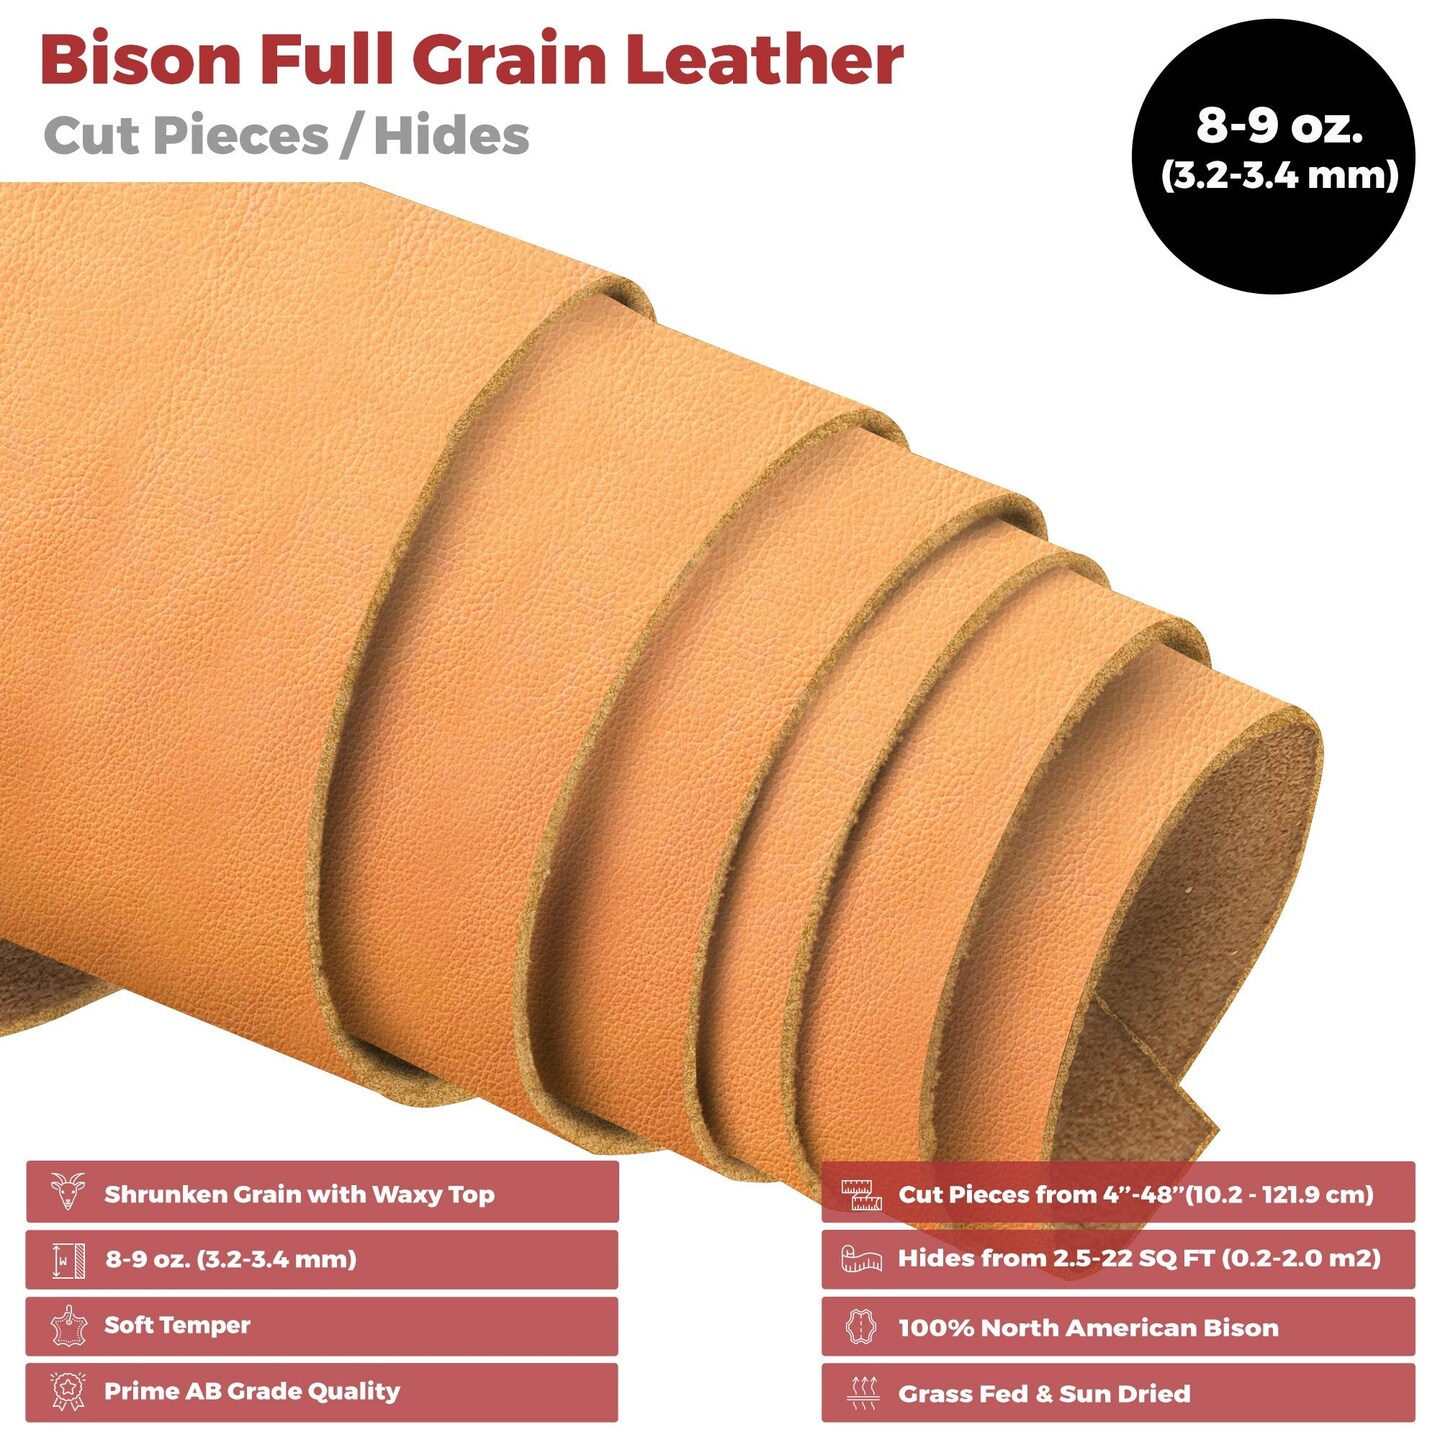 ELW Genuine American Leather Bison 8-9 oz (3.2-3.4mm) Pre-Cut - 4 to 23 SQ FT -Full Grain Leather&#xA0;Bison Hide DIY Craft Projects, Bag, Chap, Motorcycle, Clothing, Jewelry, Moccasins